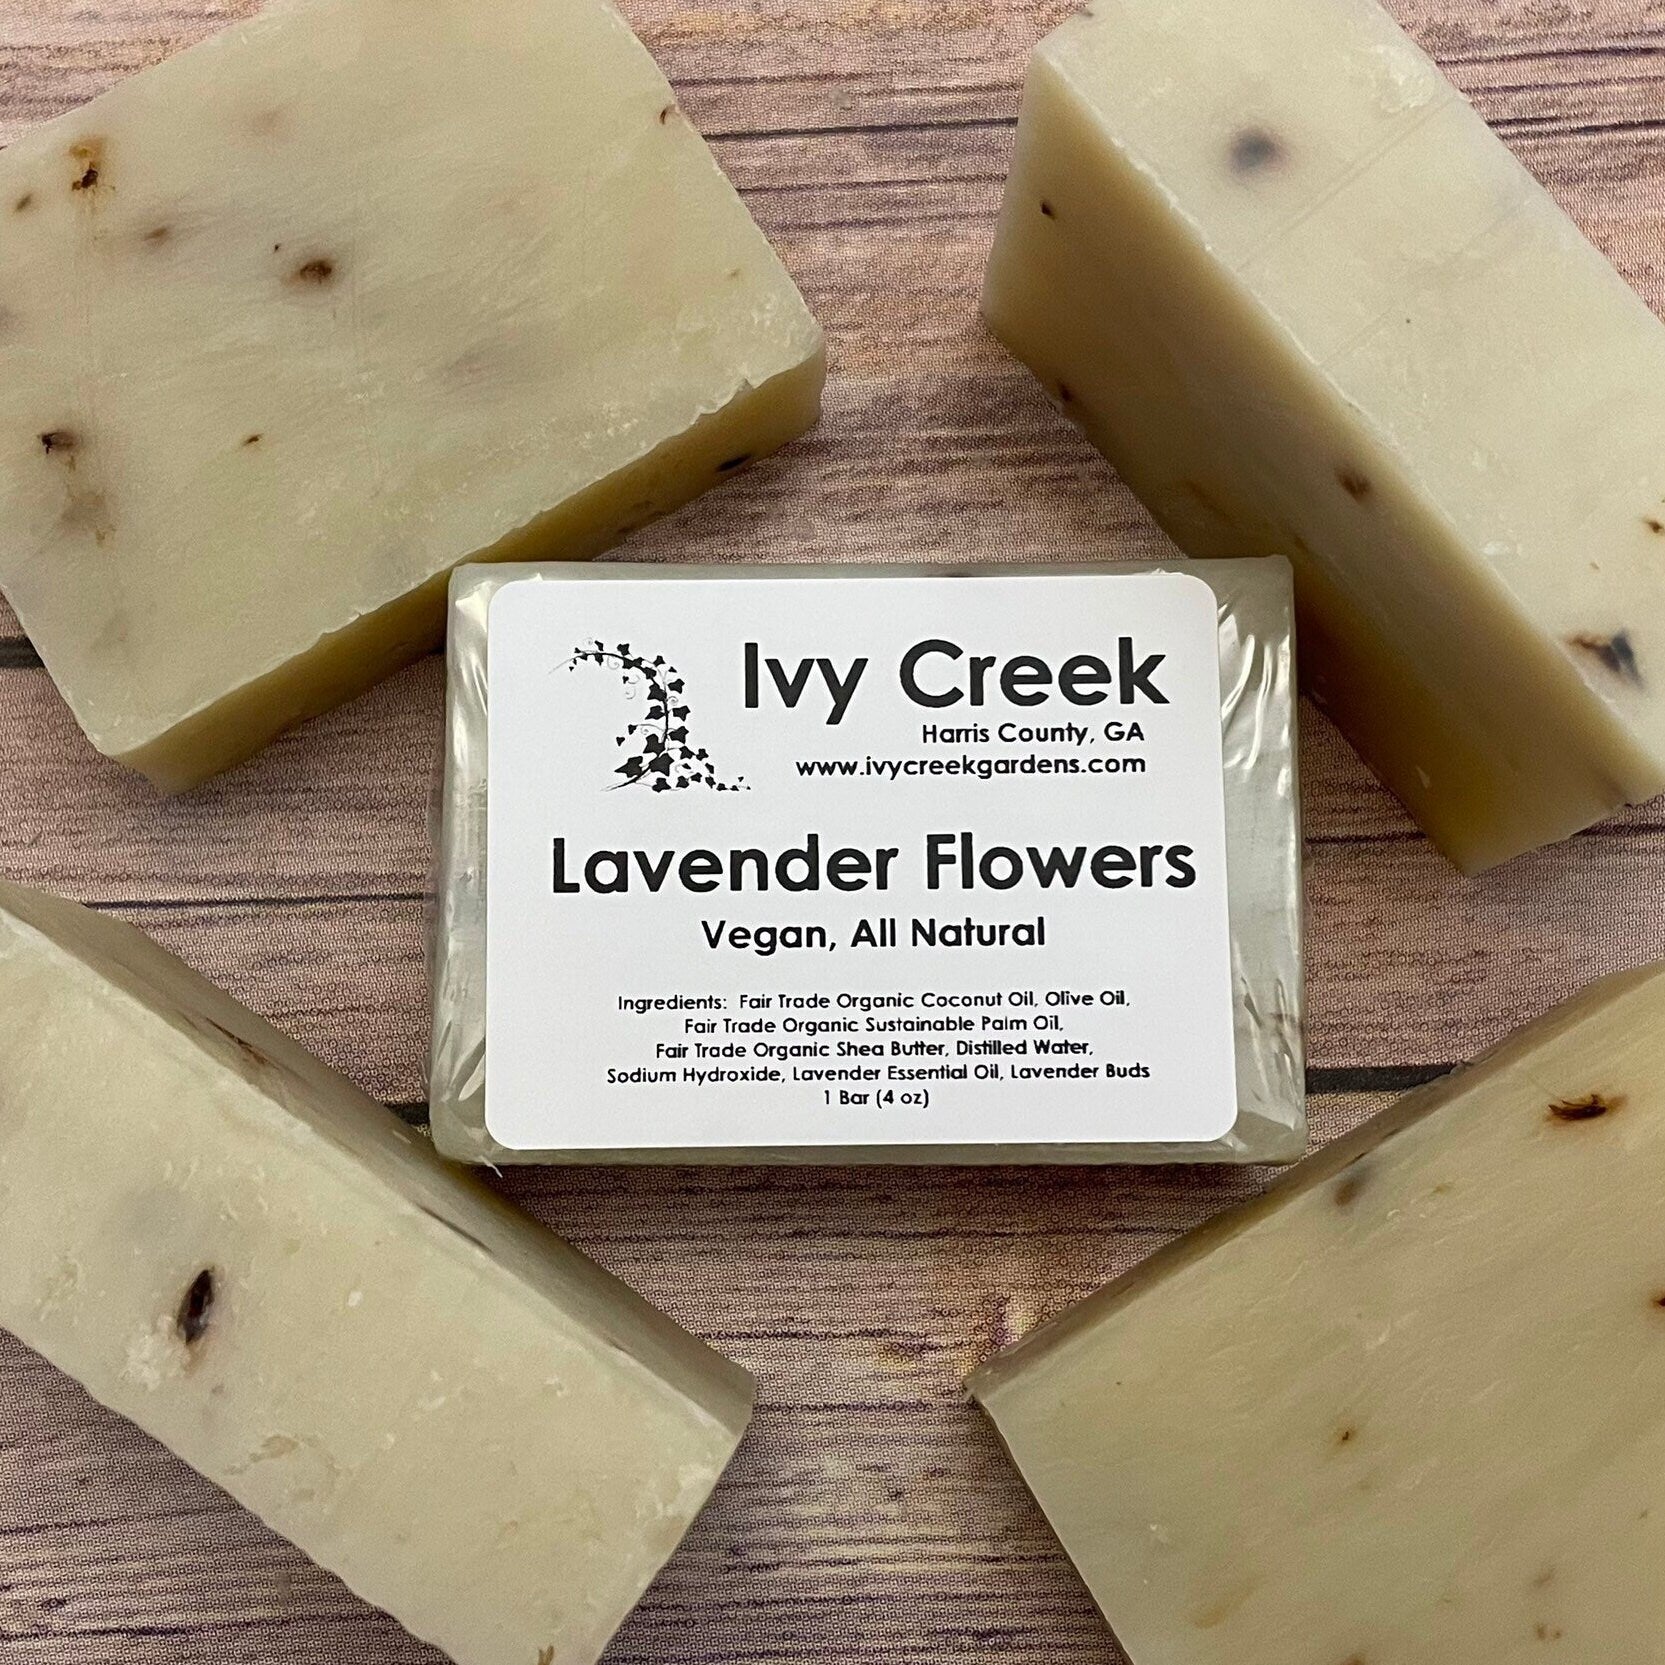 Lavender Flowers Vegan Soap, Vegan Soap, Natural Soap, Holistic Soap, Gifts for Her, Gifts for Mom, Fair Trade Soap